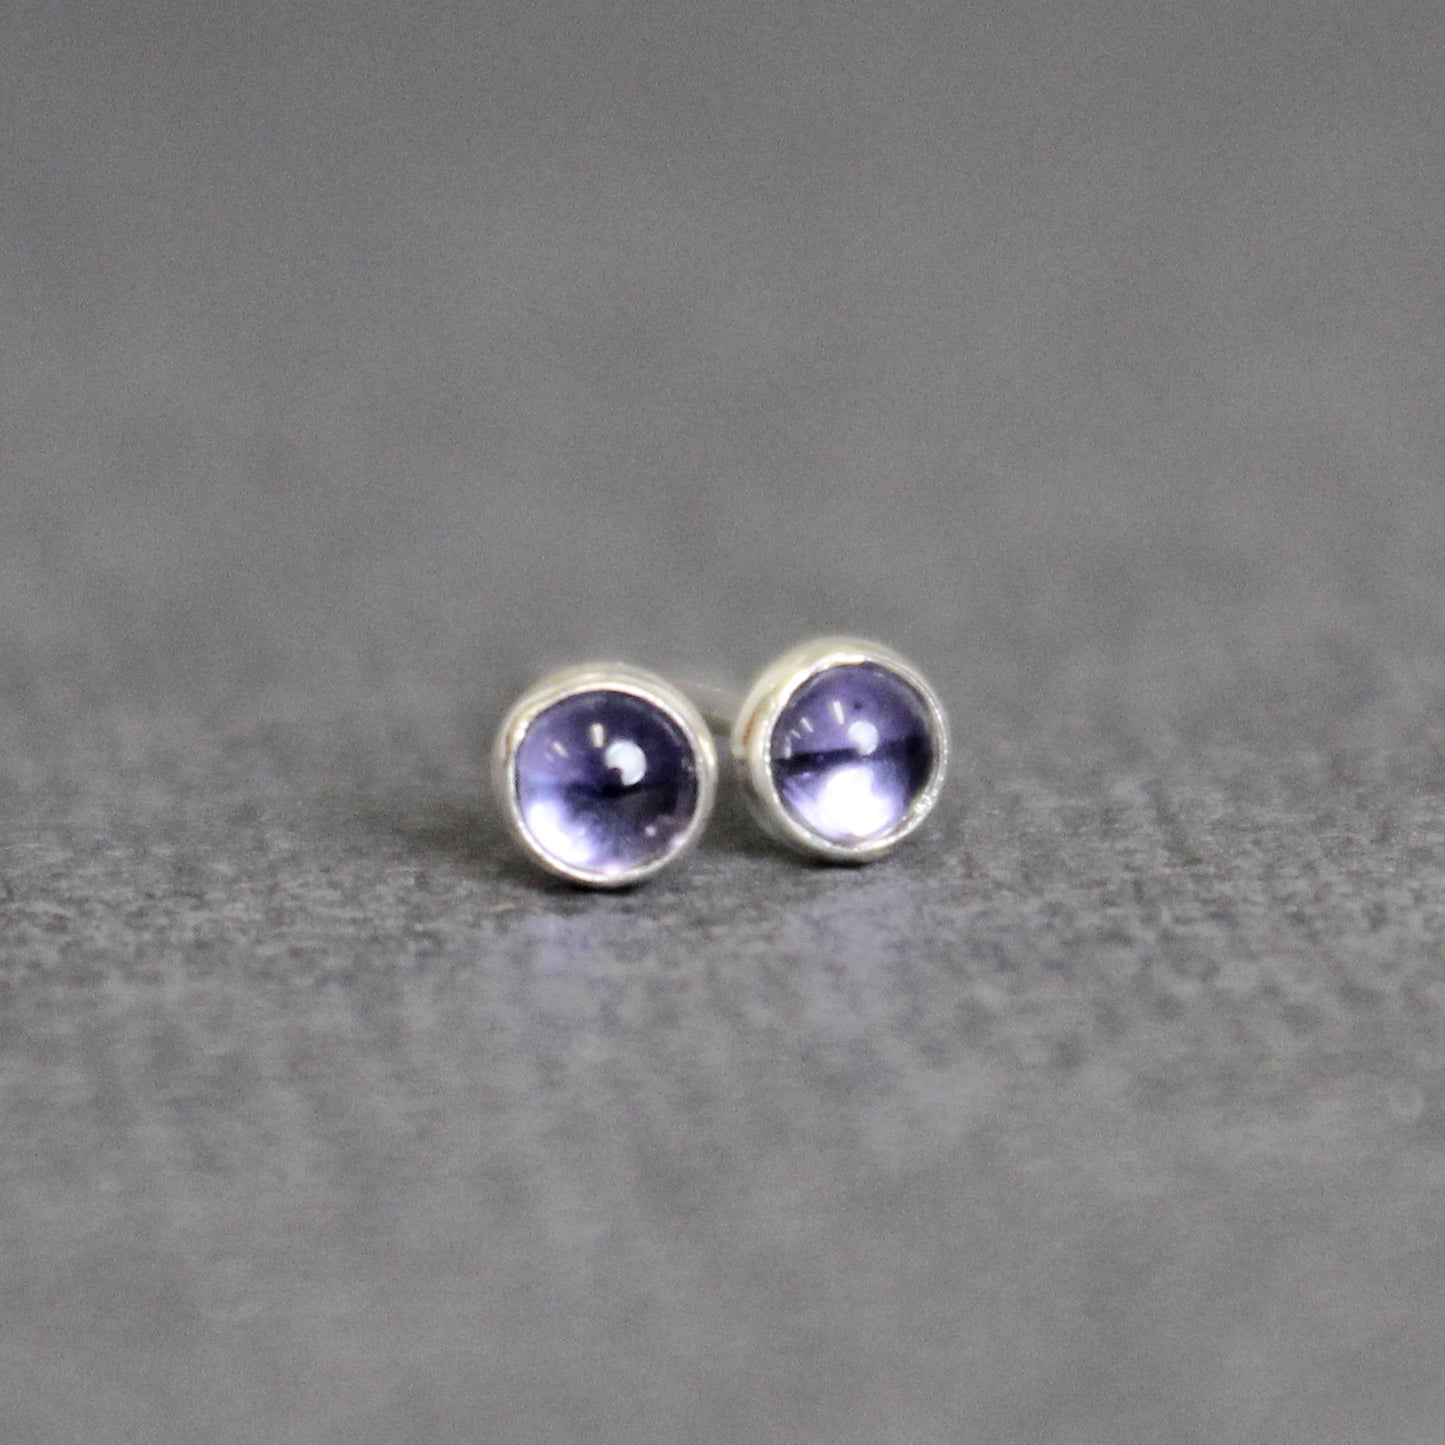 Tiny Iolite Stud Earrings, 3mm Blue Studs in Sterling Silver